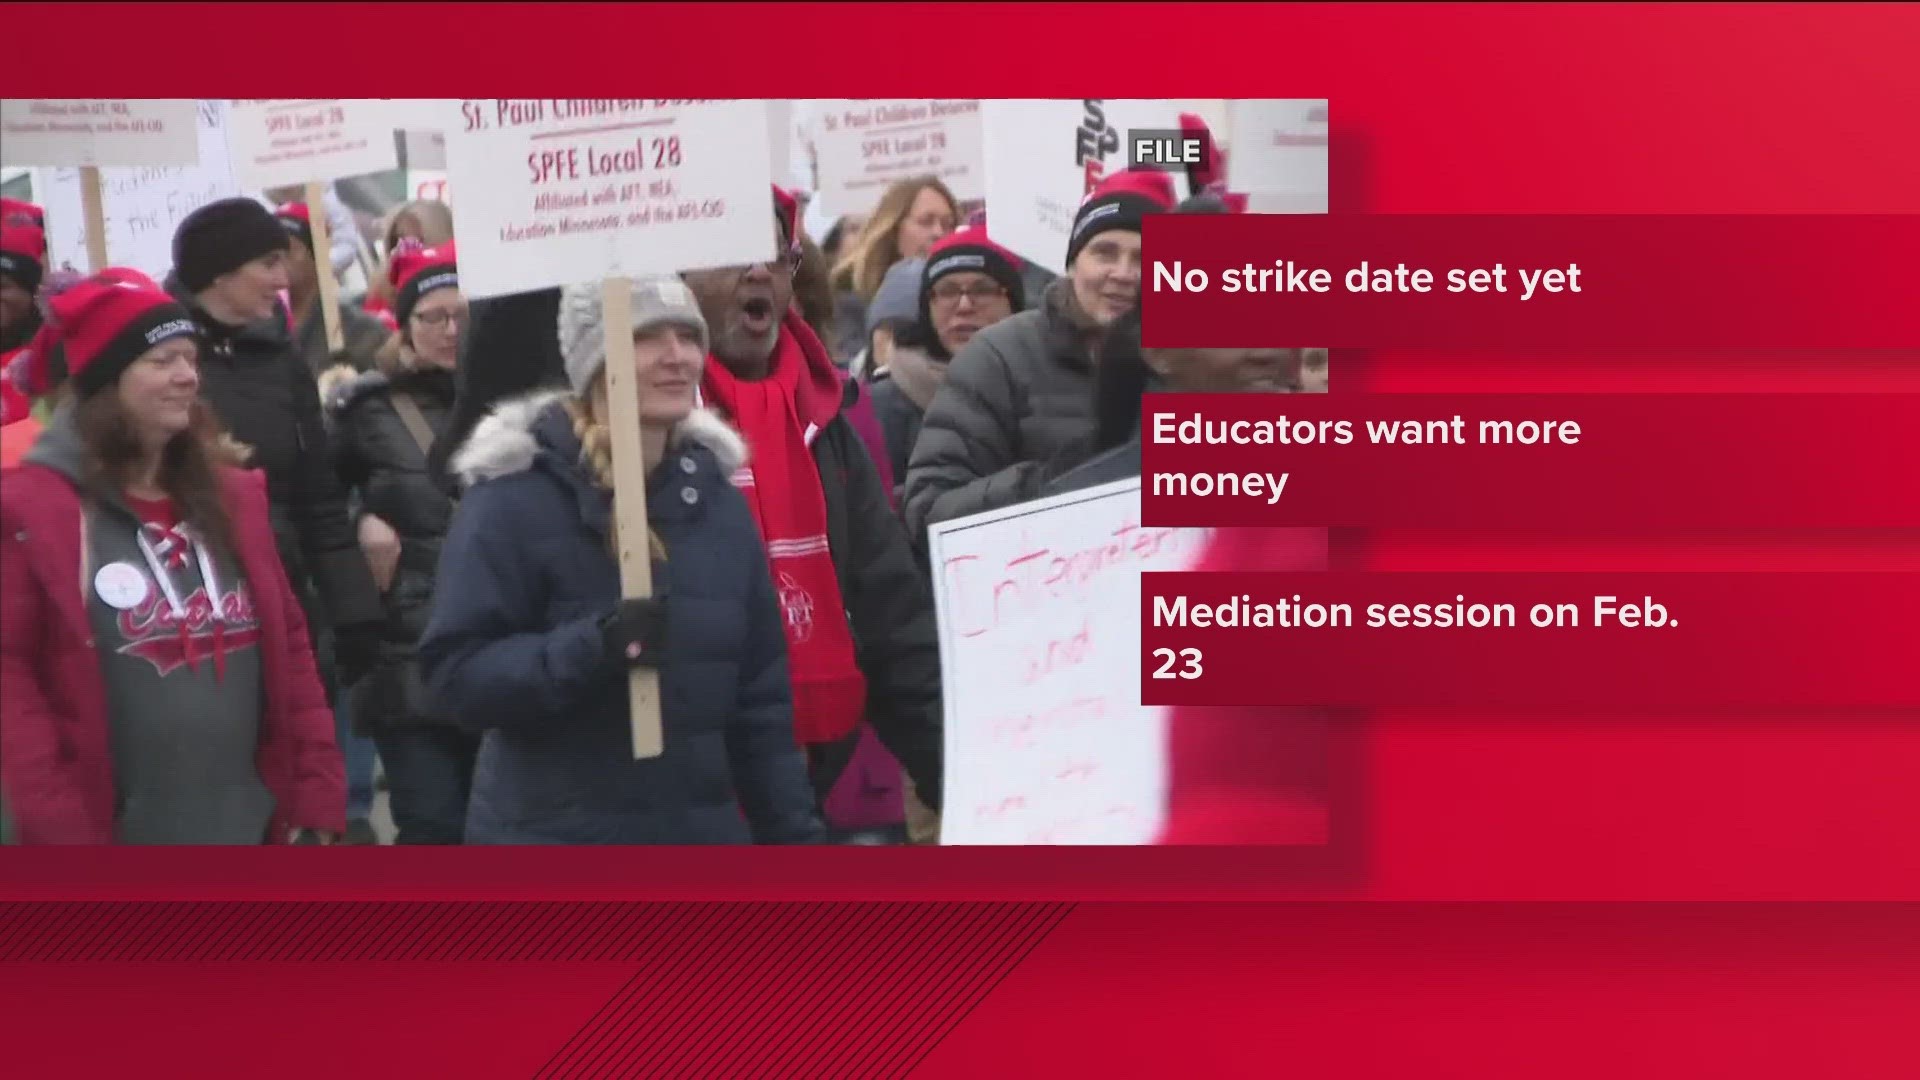 According to the St. Paul Federation of Educators, more than 92% of the nearly 3,700 members voted to strike, setting in motion the possibility for a strike.